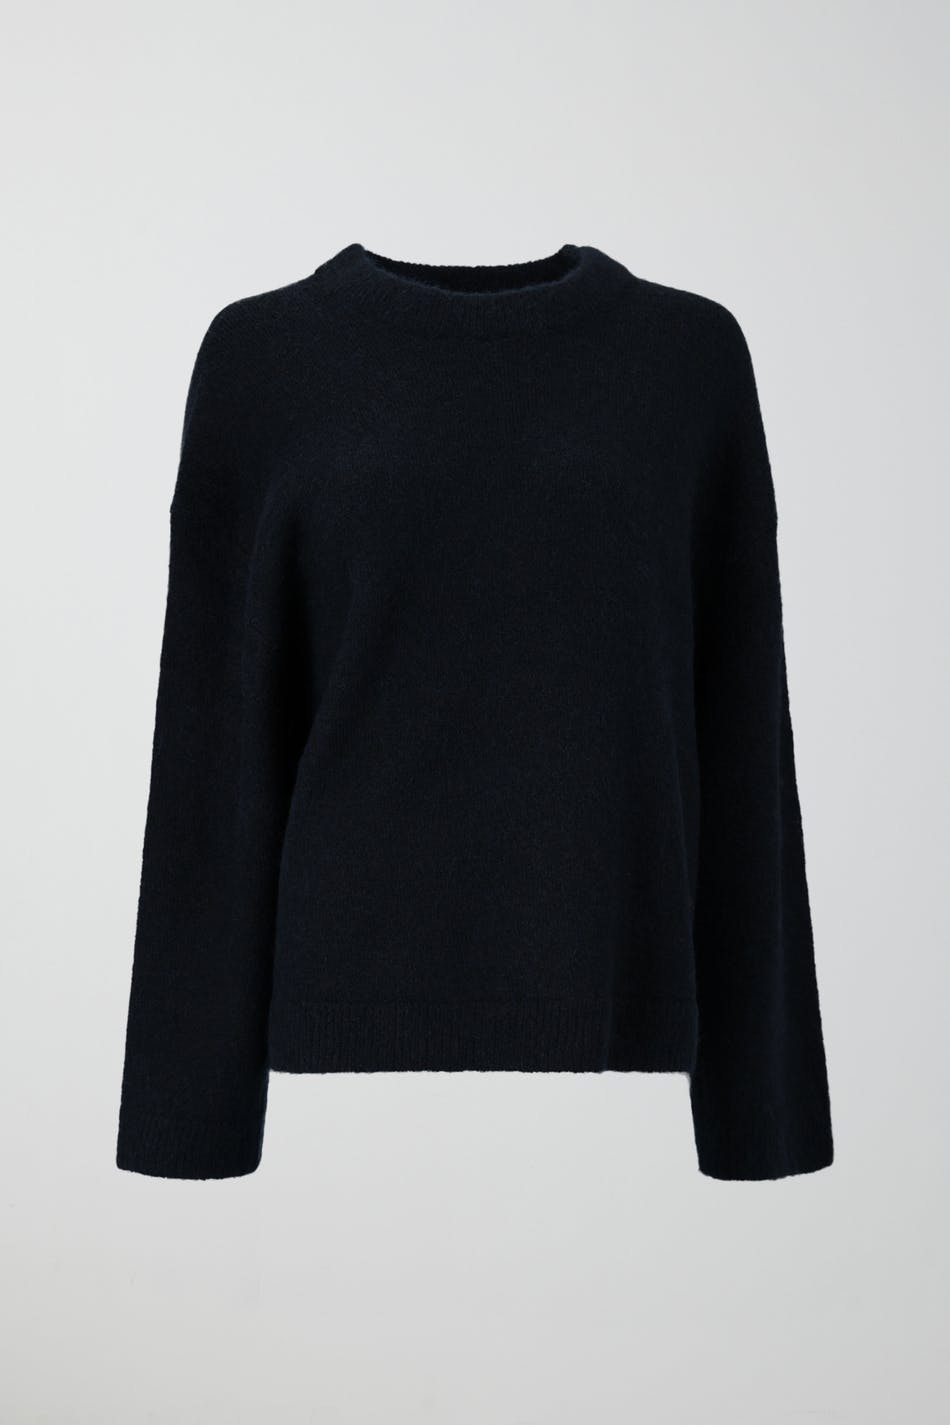 Crew neck knitted sweater - Gina Tricot